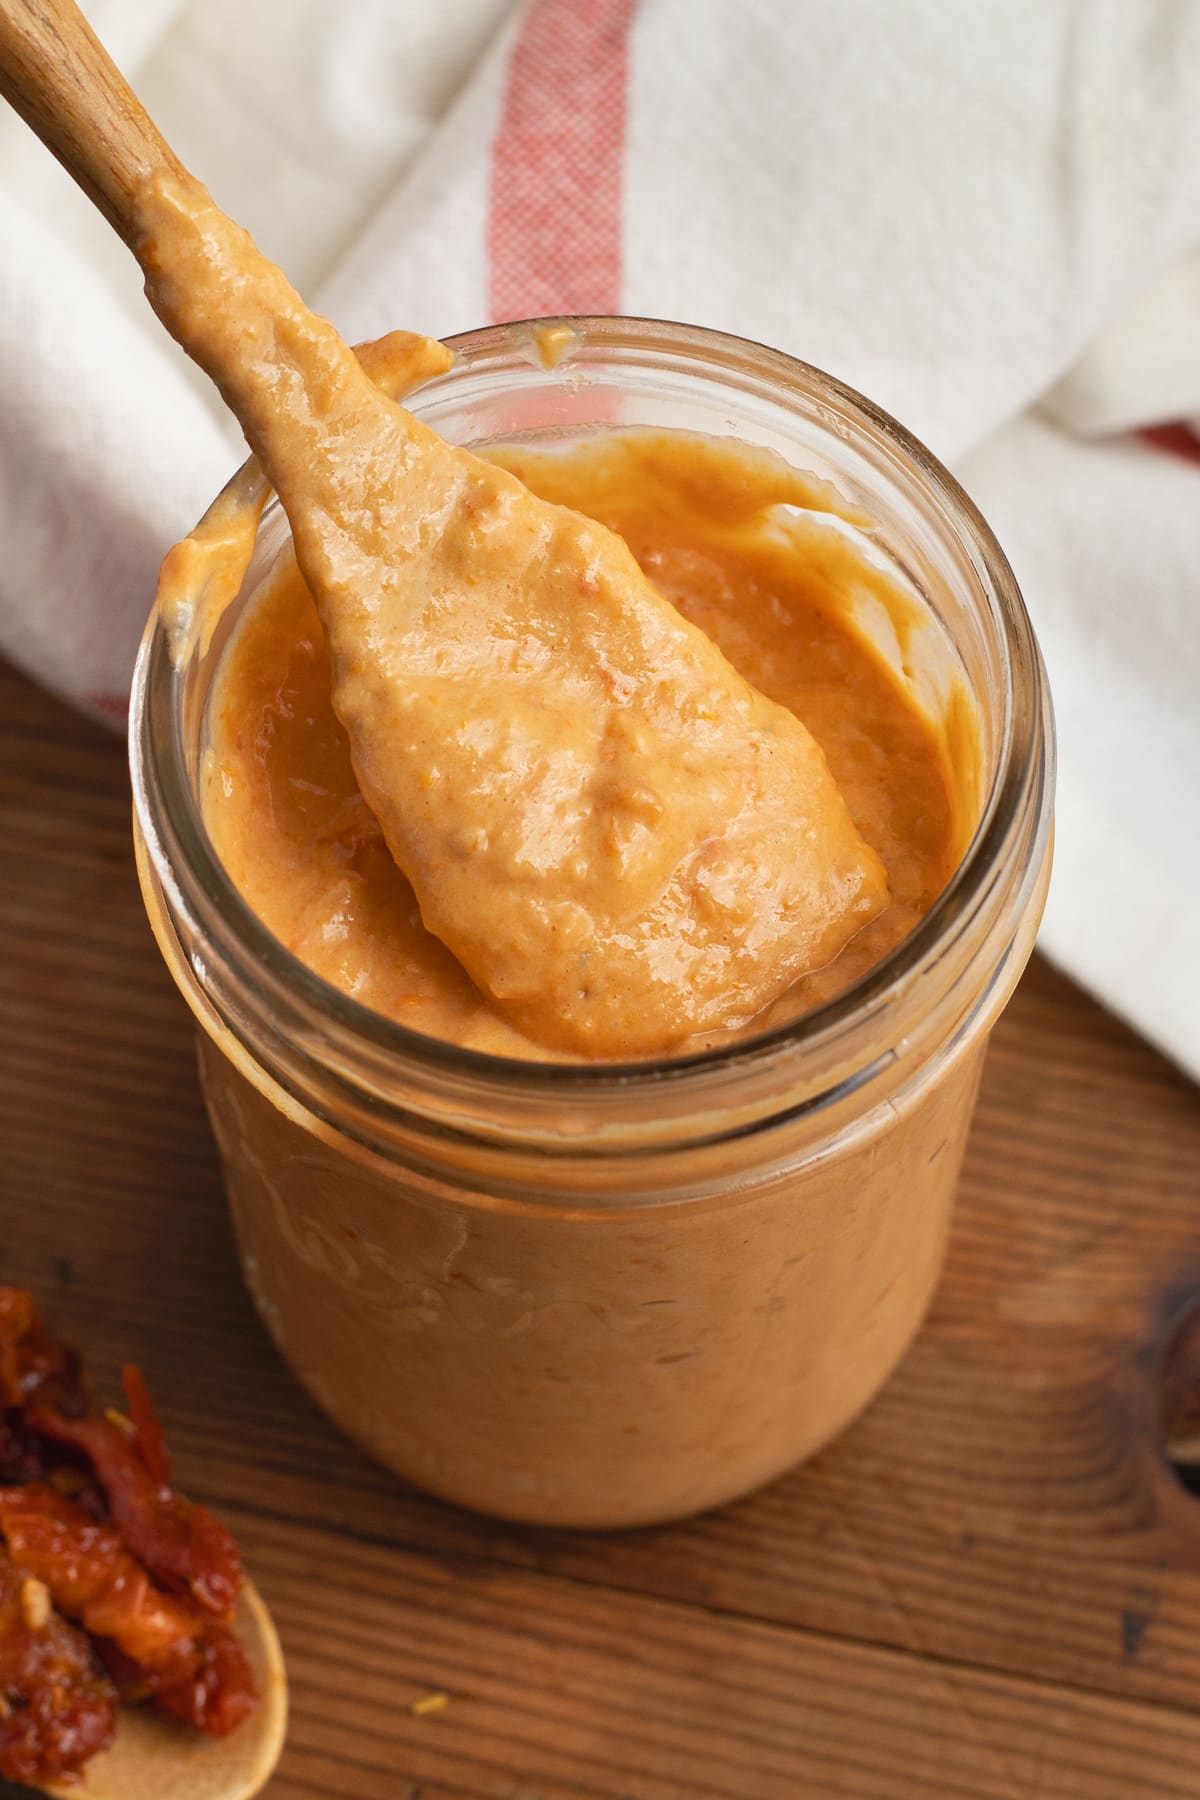 This is a picture of a jar of sun-dried tomato aioli with a spoon.